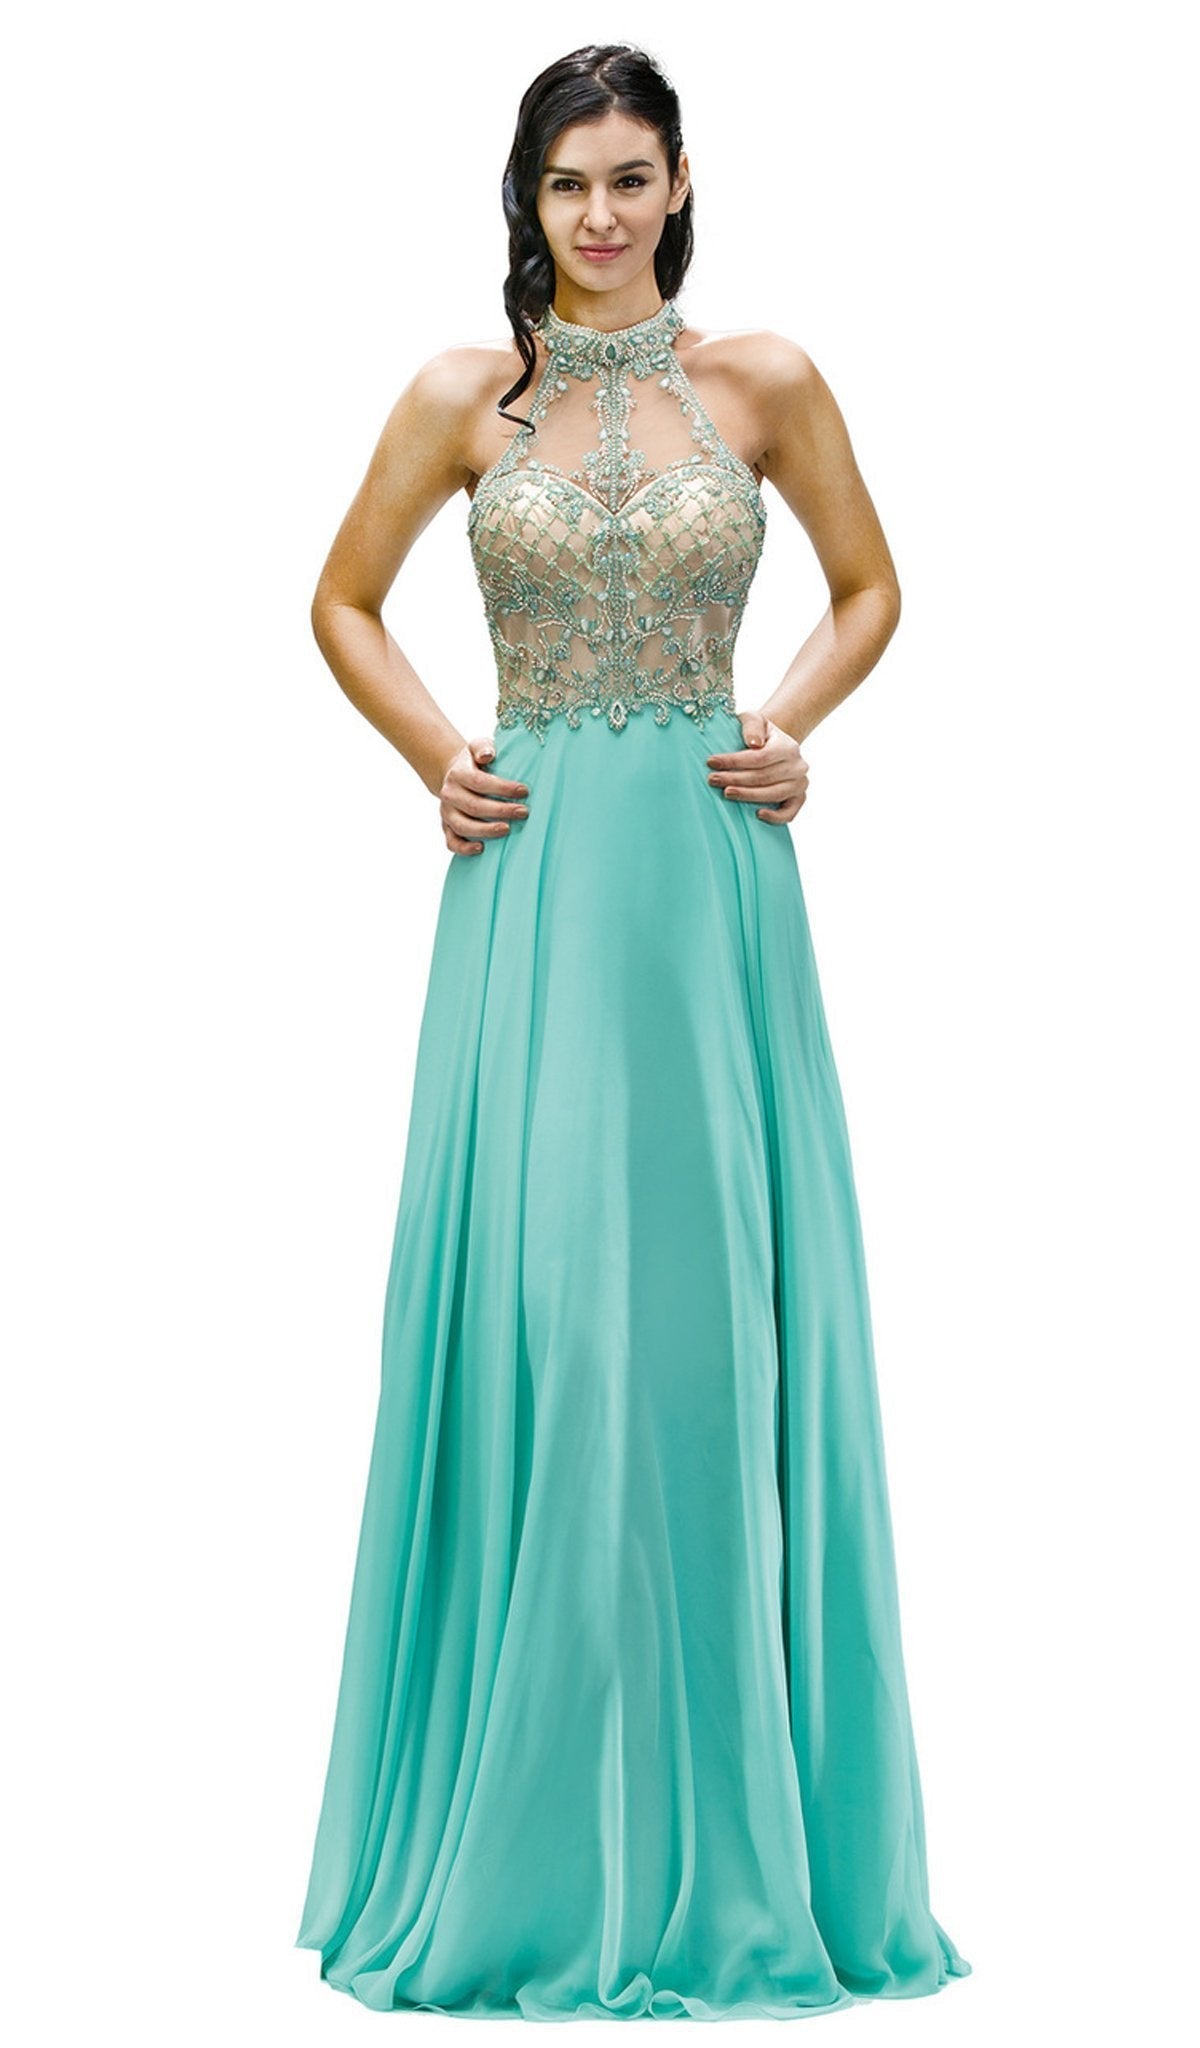 Dancing Queen - 9293 Exquisite Illusion High Halter Chiffon A-Line Gown Special Occasion Dress XS / Mint